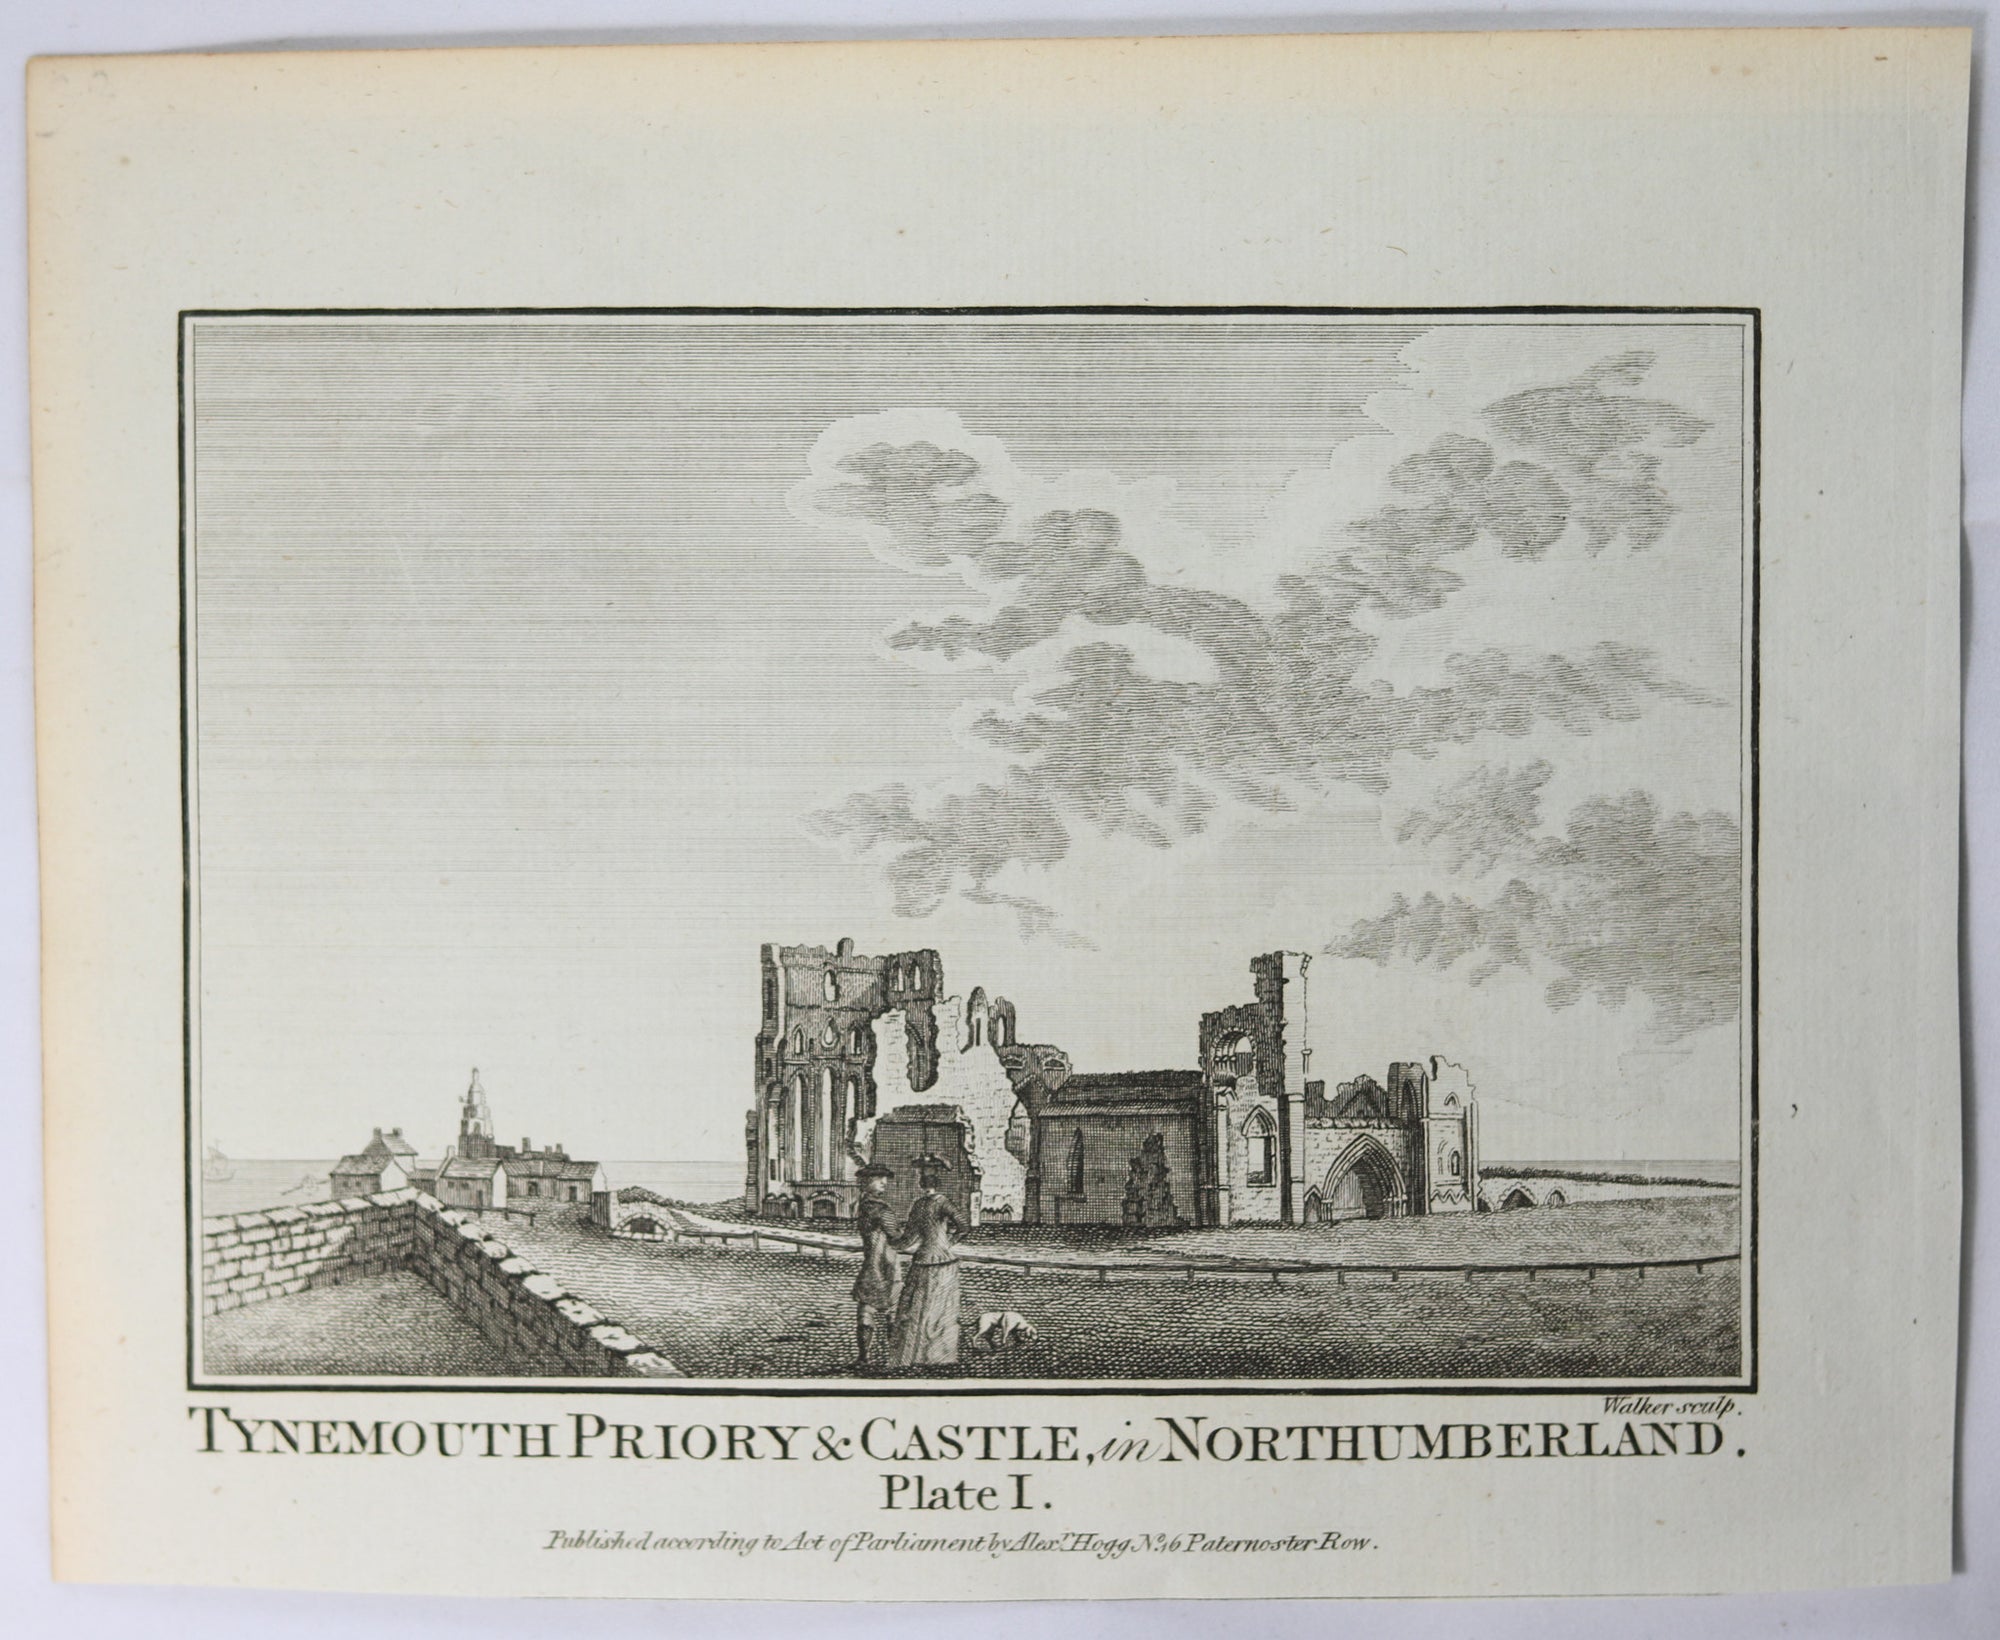 Print ‘Tynemouth Priory & Castle – Northumberland Plate 1” @1786